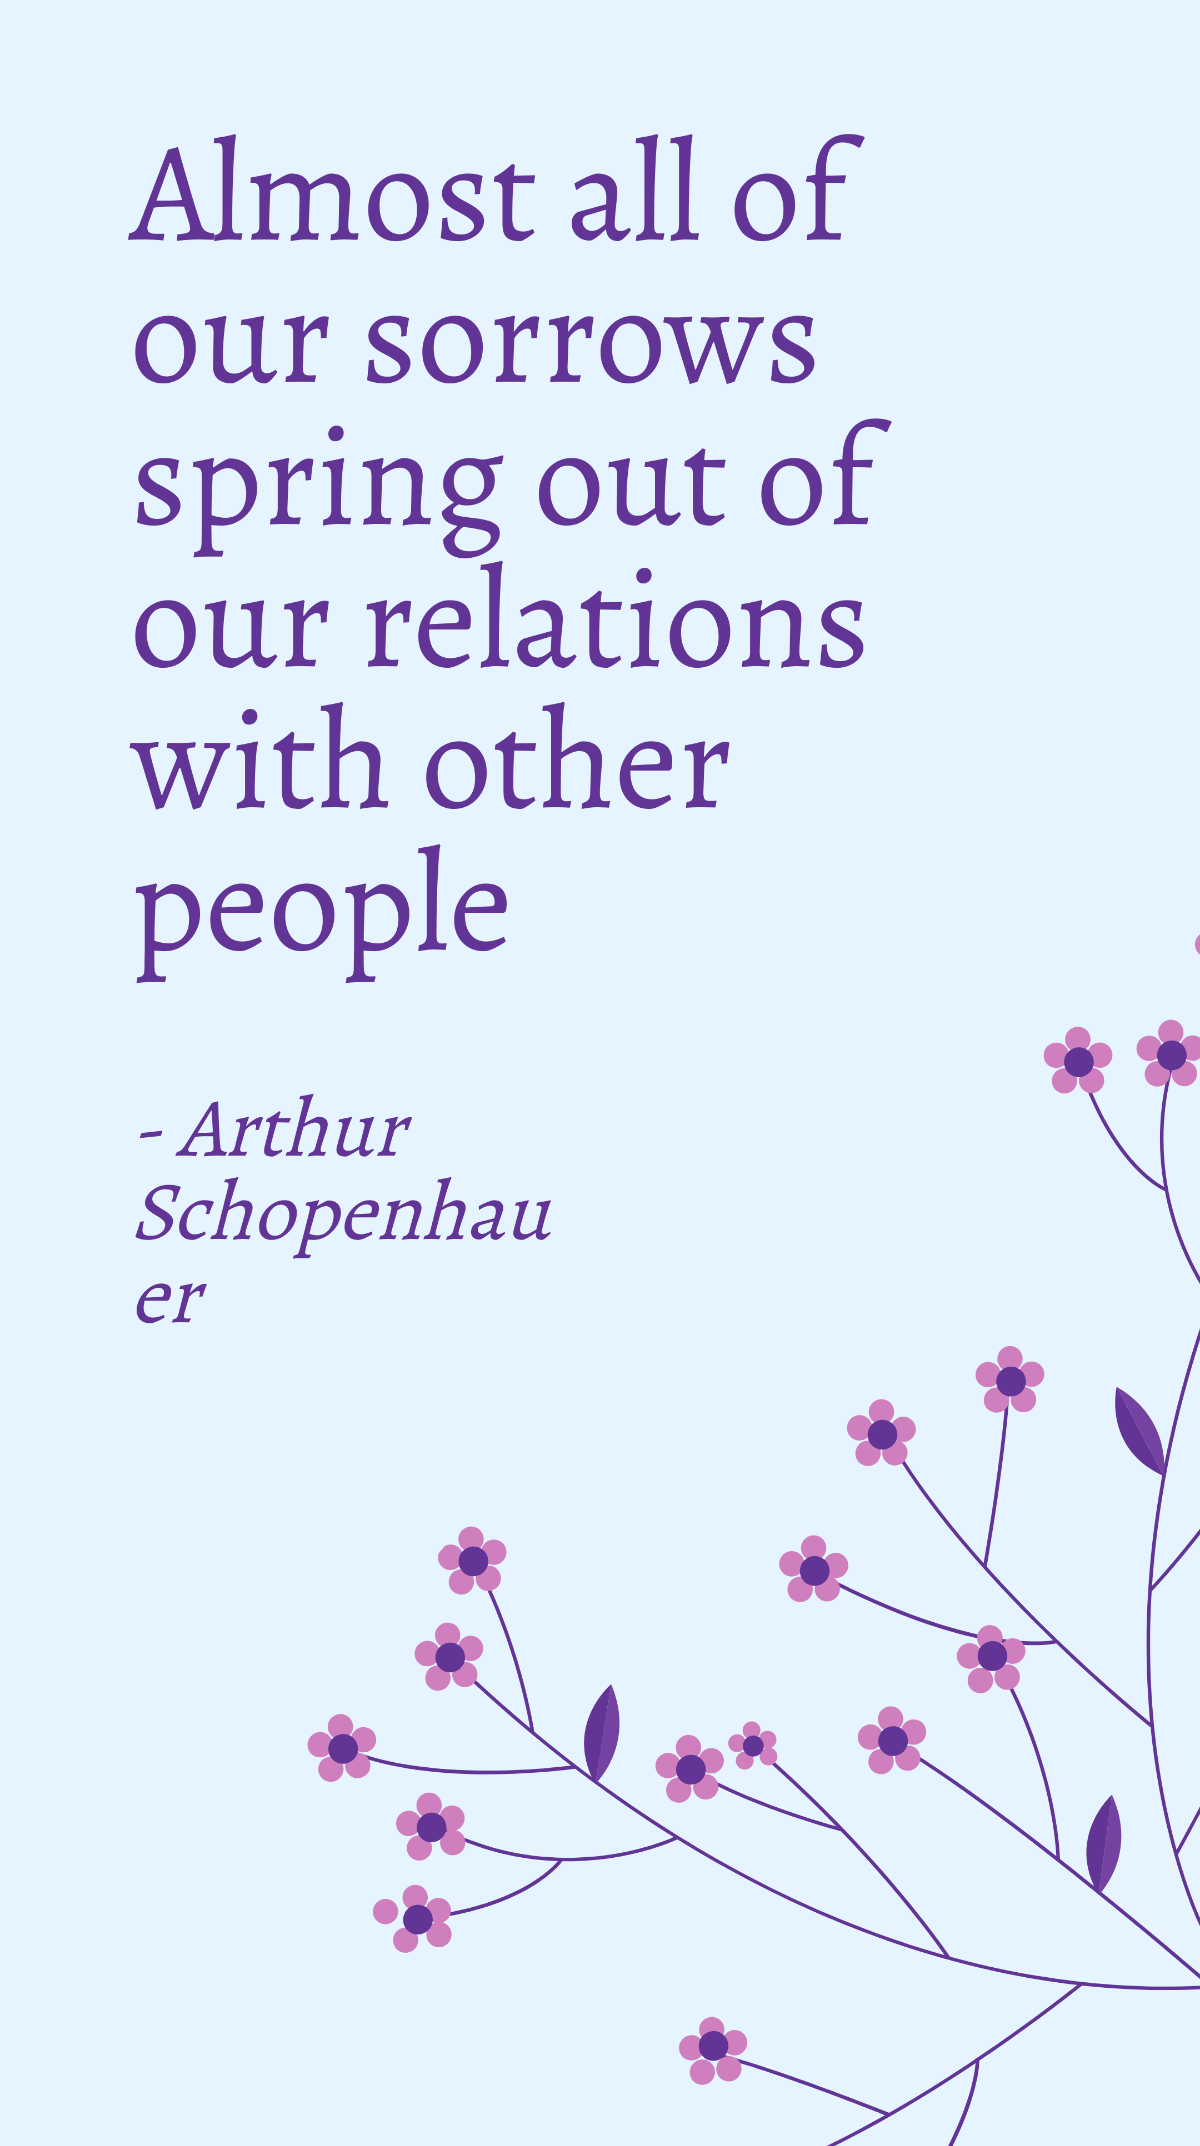 Free Arthur Schopenhauer - Almost all of our sorrows spring out of our relations with other people Template